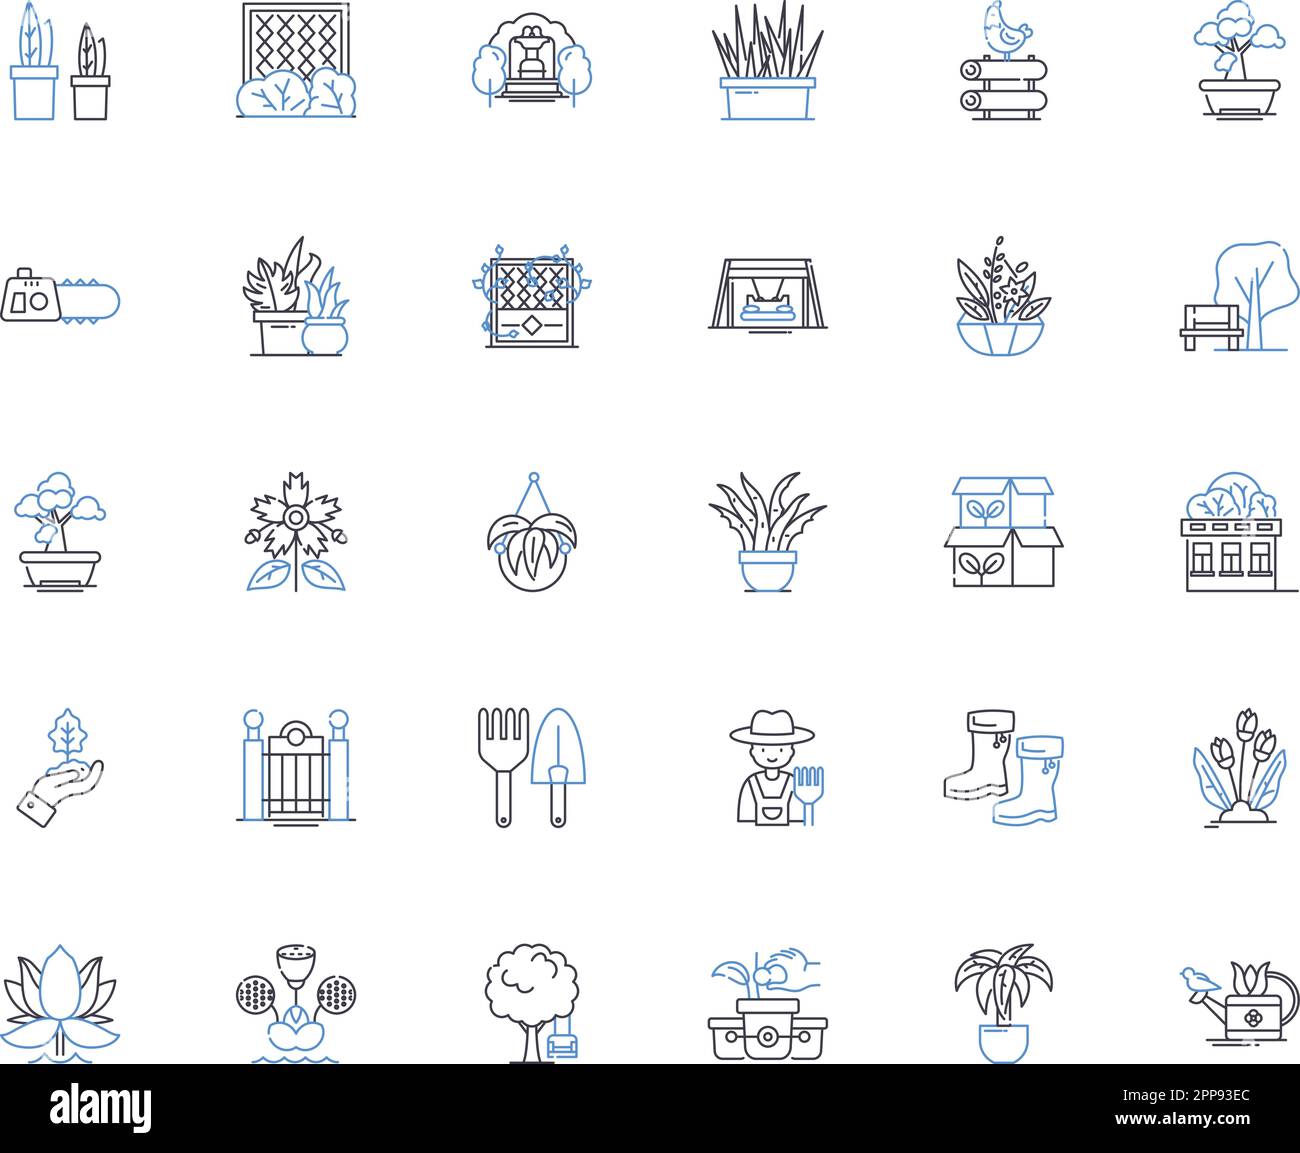 Zen Garden & Tranquility line icons collection. Serenity, Simplicity, Harmony, Balance, Contemplation, Tranquility, Peacefulness vector and linear Stock Vector